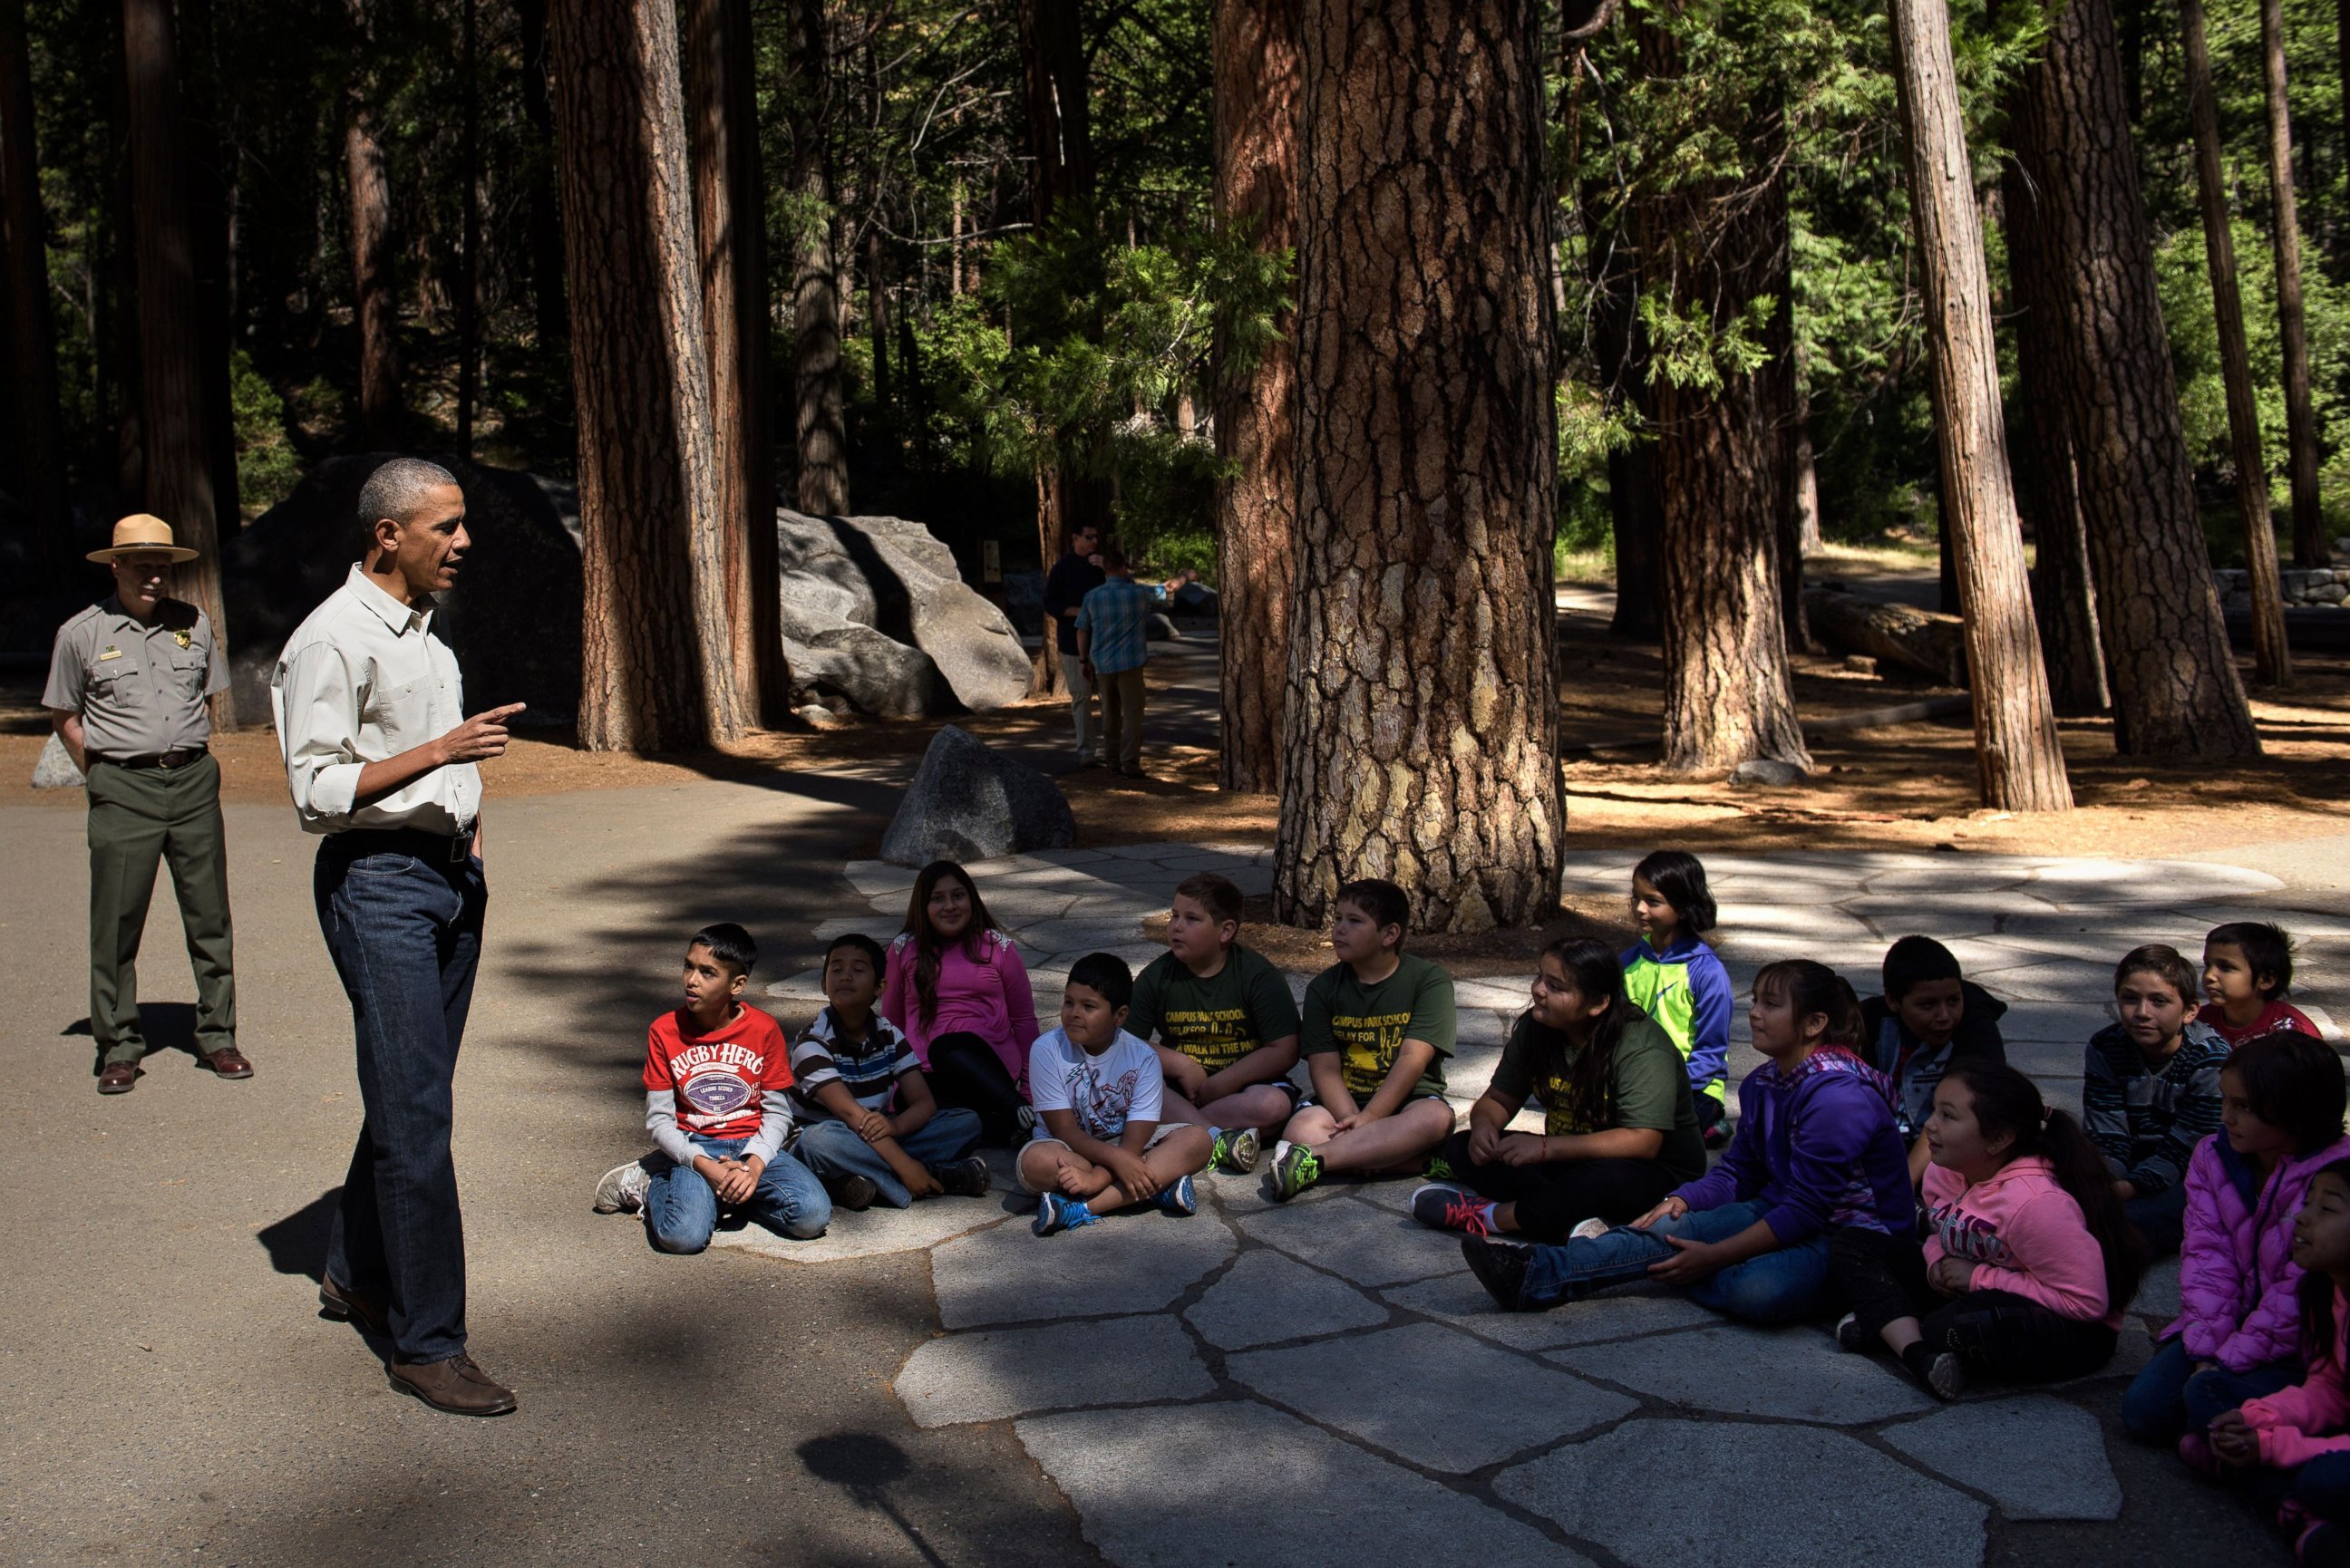 PHOTO: President Barack Obama speaks to children about the "Every Kid in the Park" initiative in Yosemite National Park, California, while celebrating the 100th year of US National Parks June 18, 2016.